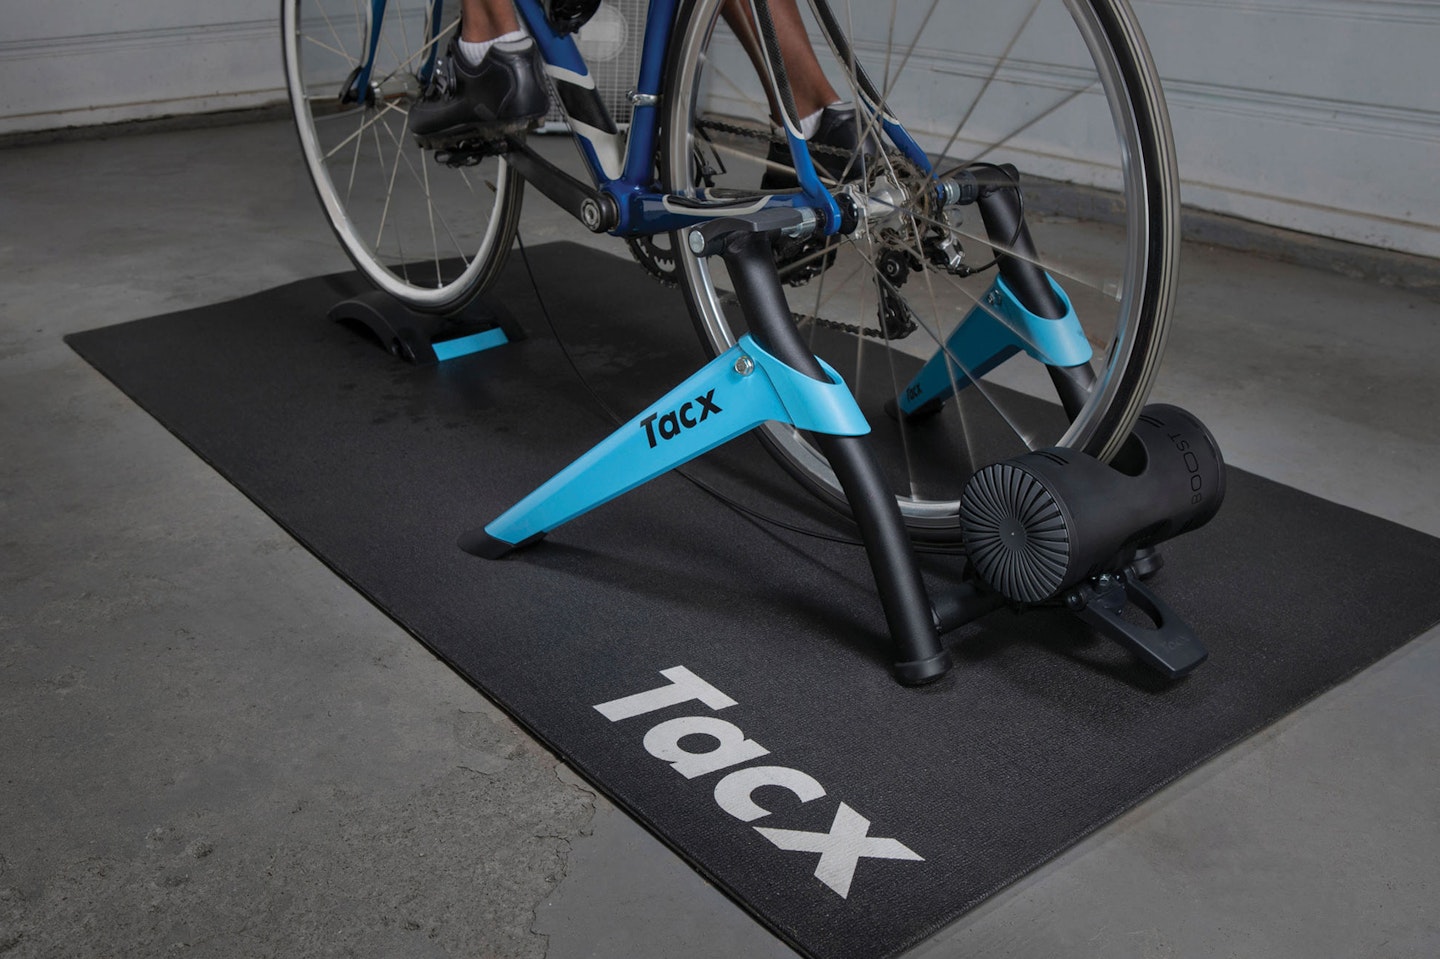 Tacx Boost turbo trainer on a mat